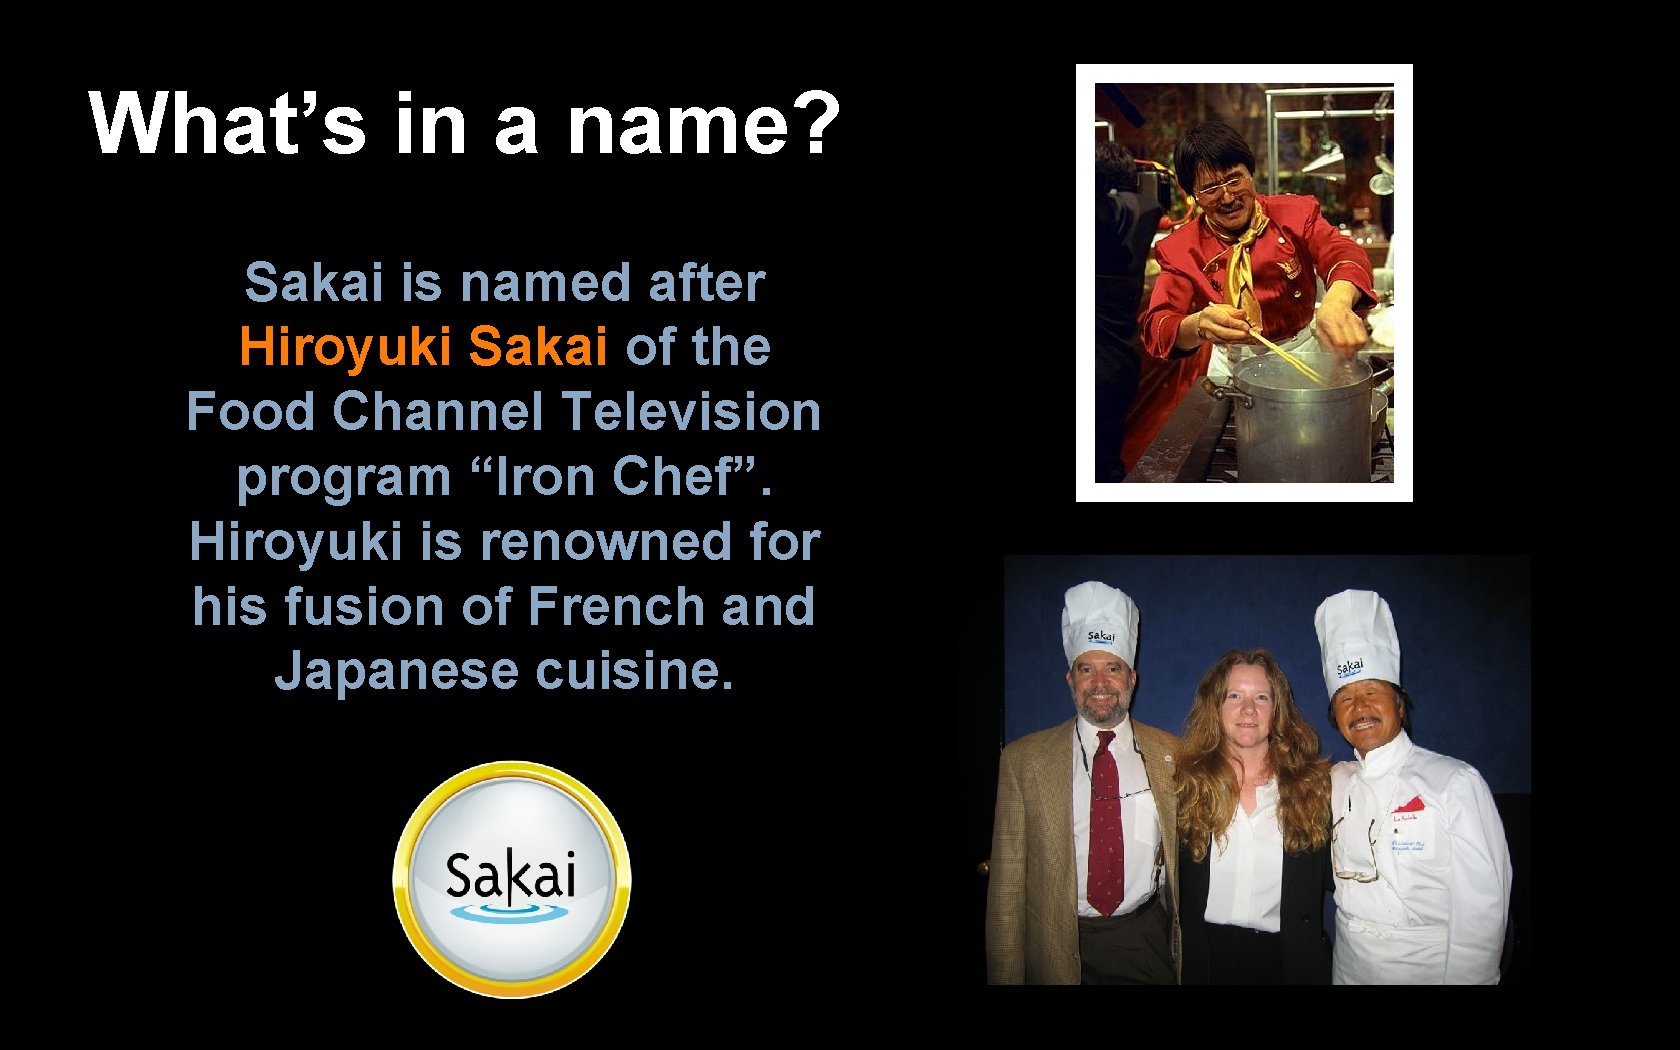 What’s in a name? Sakai is named after Hiroyuki Sakai of the Food Channel